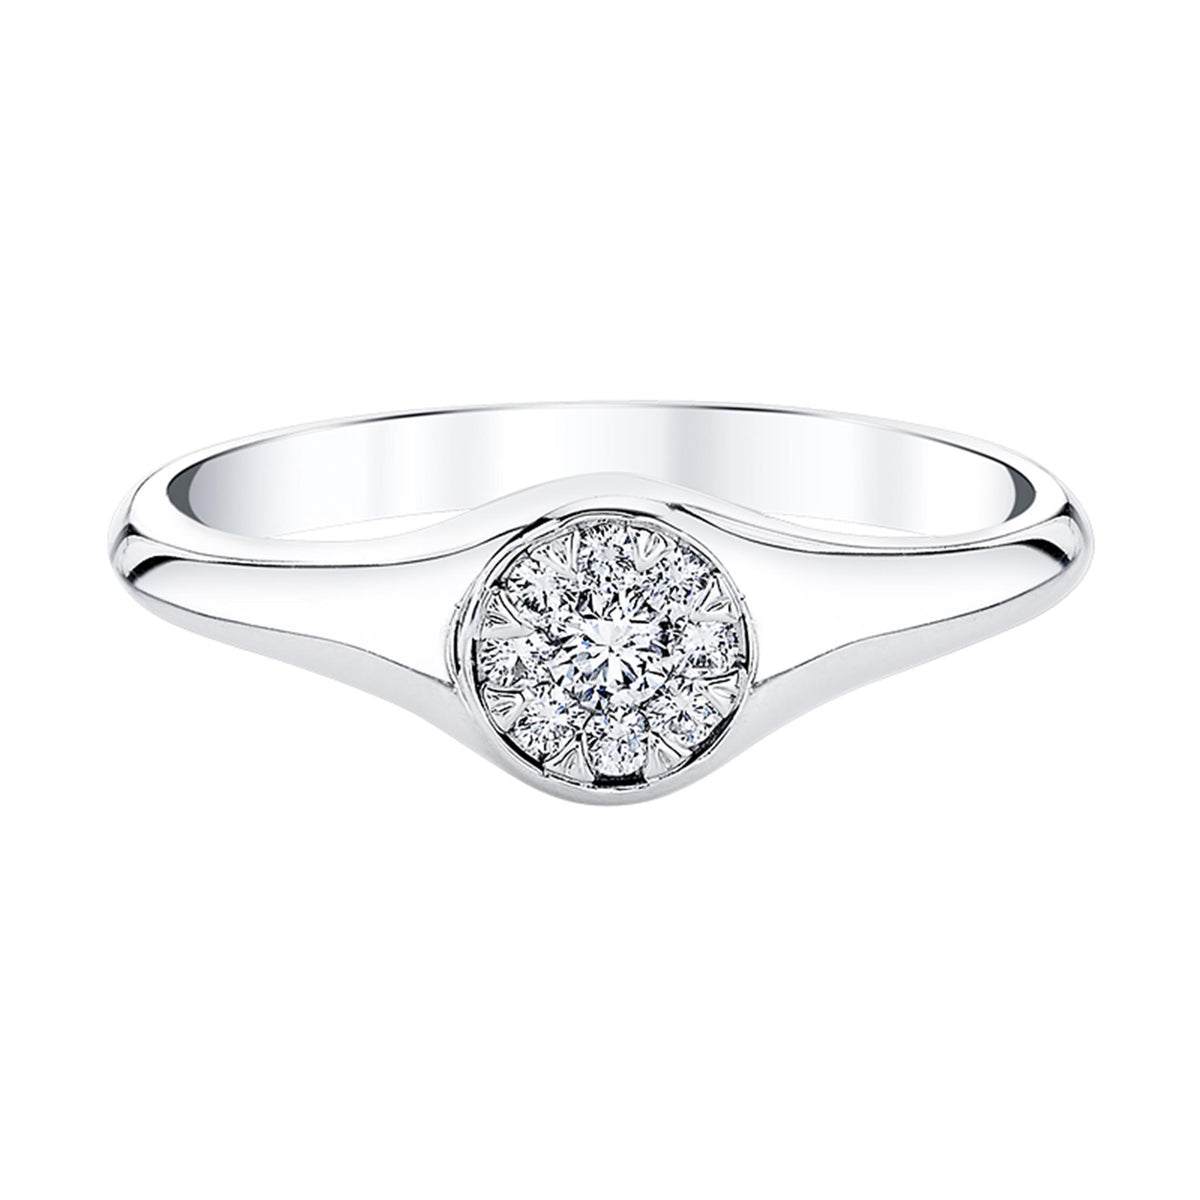 14Kt White Gold Signet-Stylel Ring With 0.15cttw Natural Diamonds